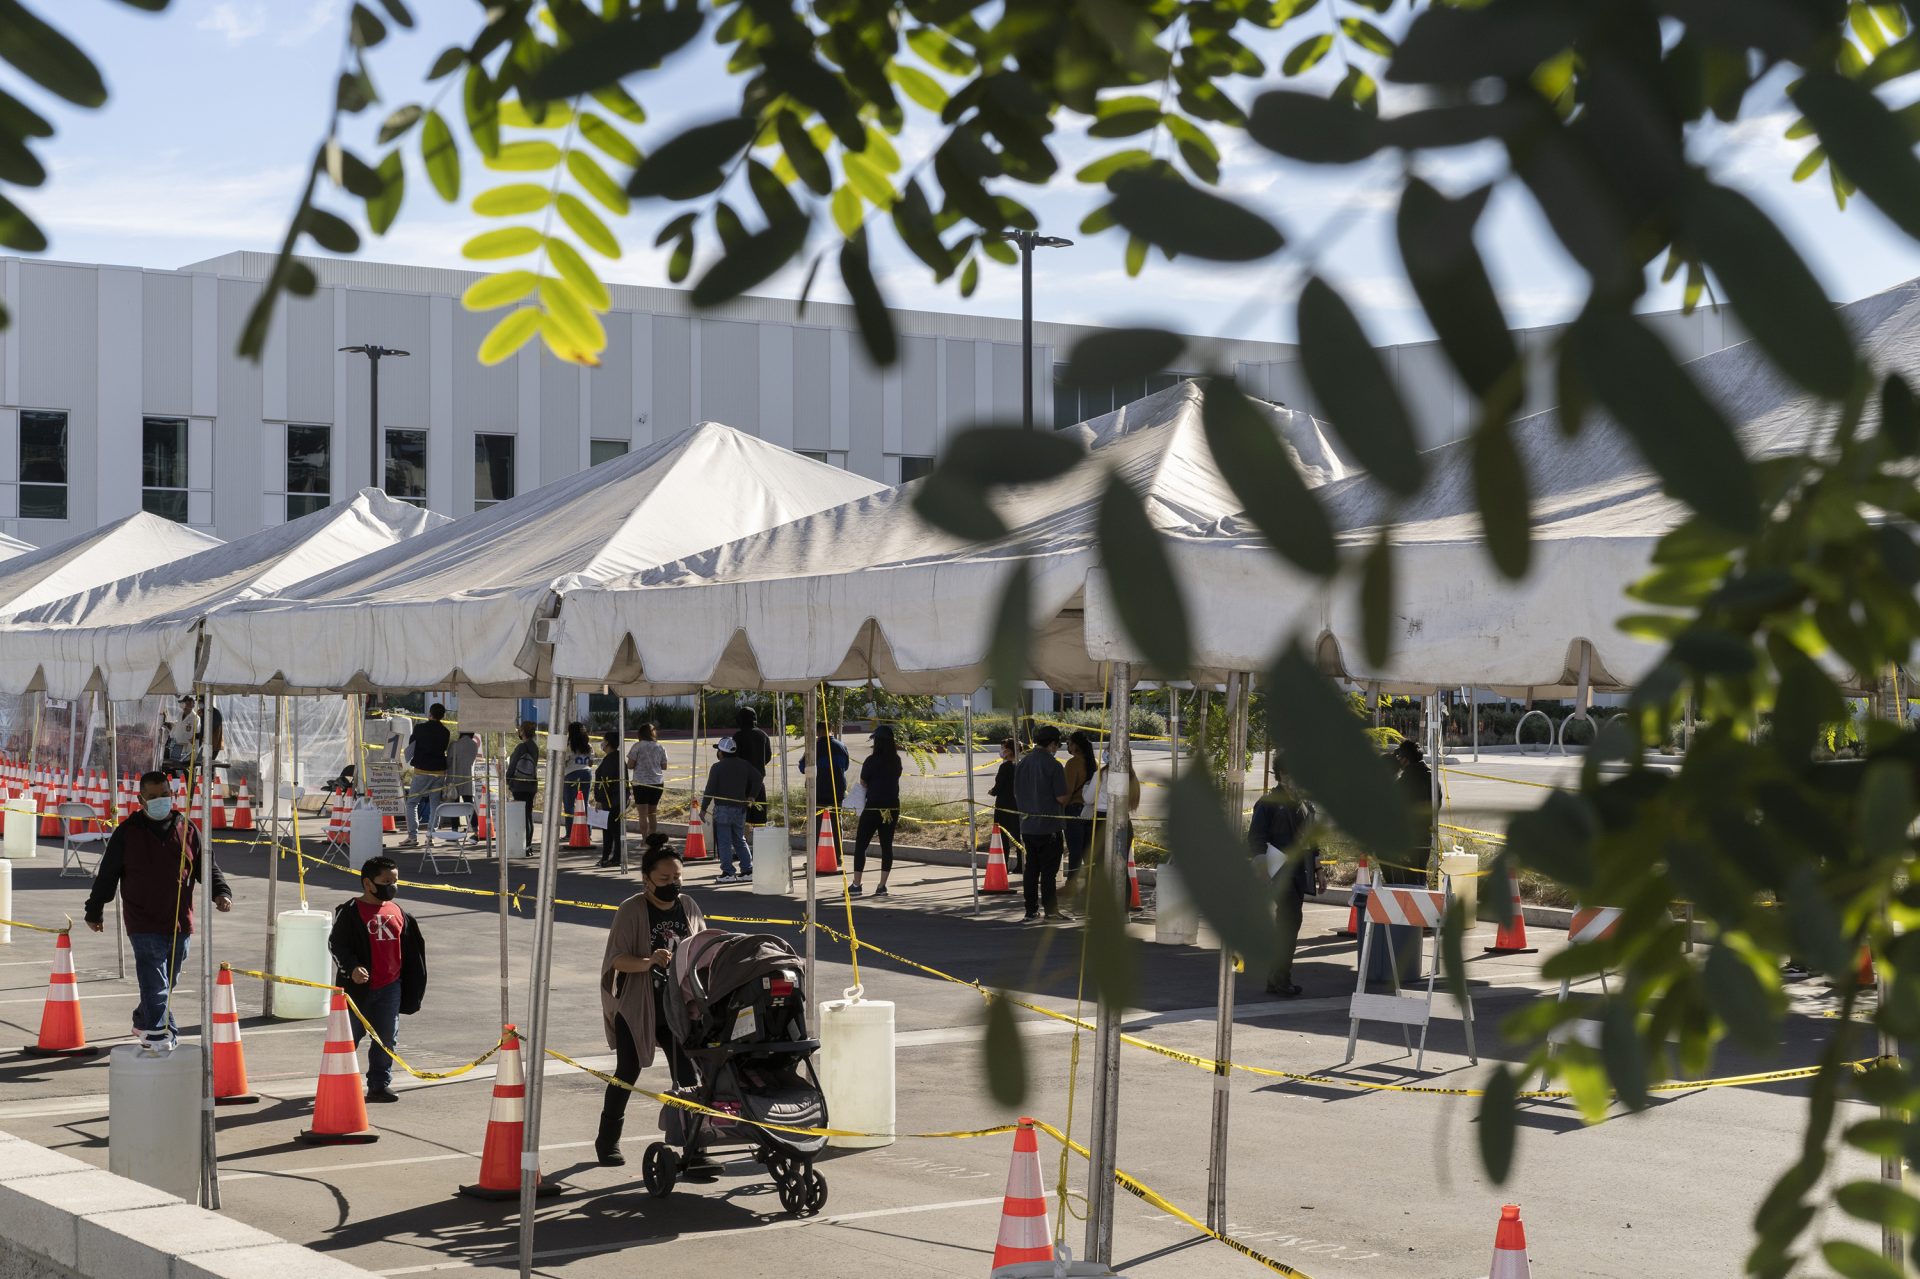 A COVID-19 testing site is set up near Martin Luther King Jr. Community Hospital. The hospital is in Willowbrook, an unincorporated part of South Los Angeles sandwiched between Compton and Watts.